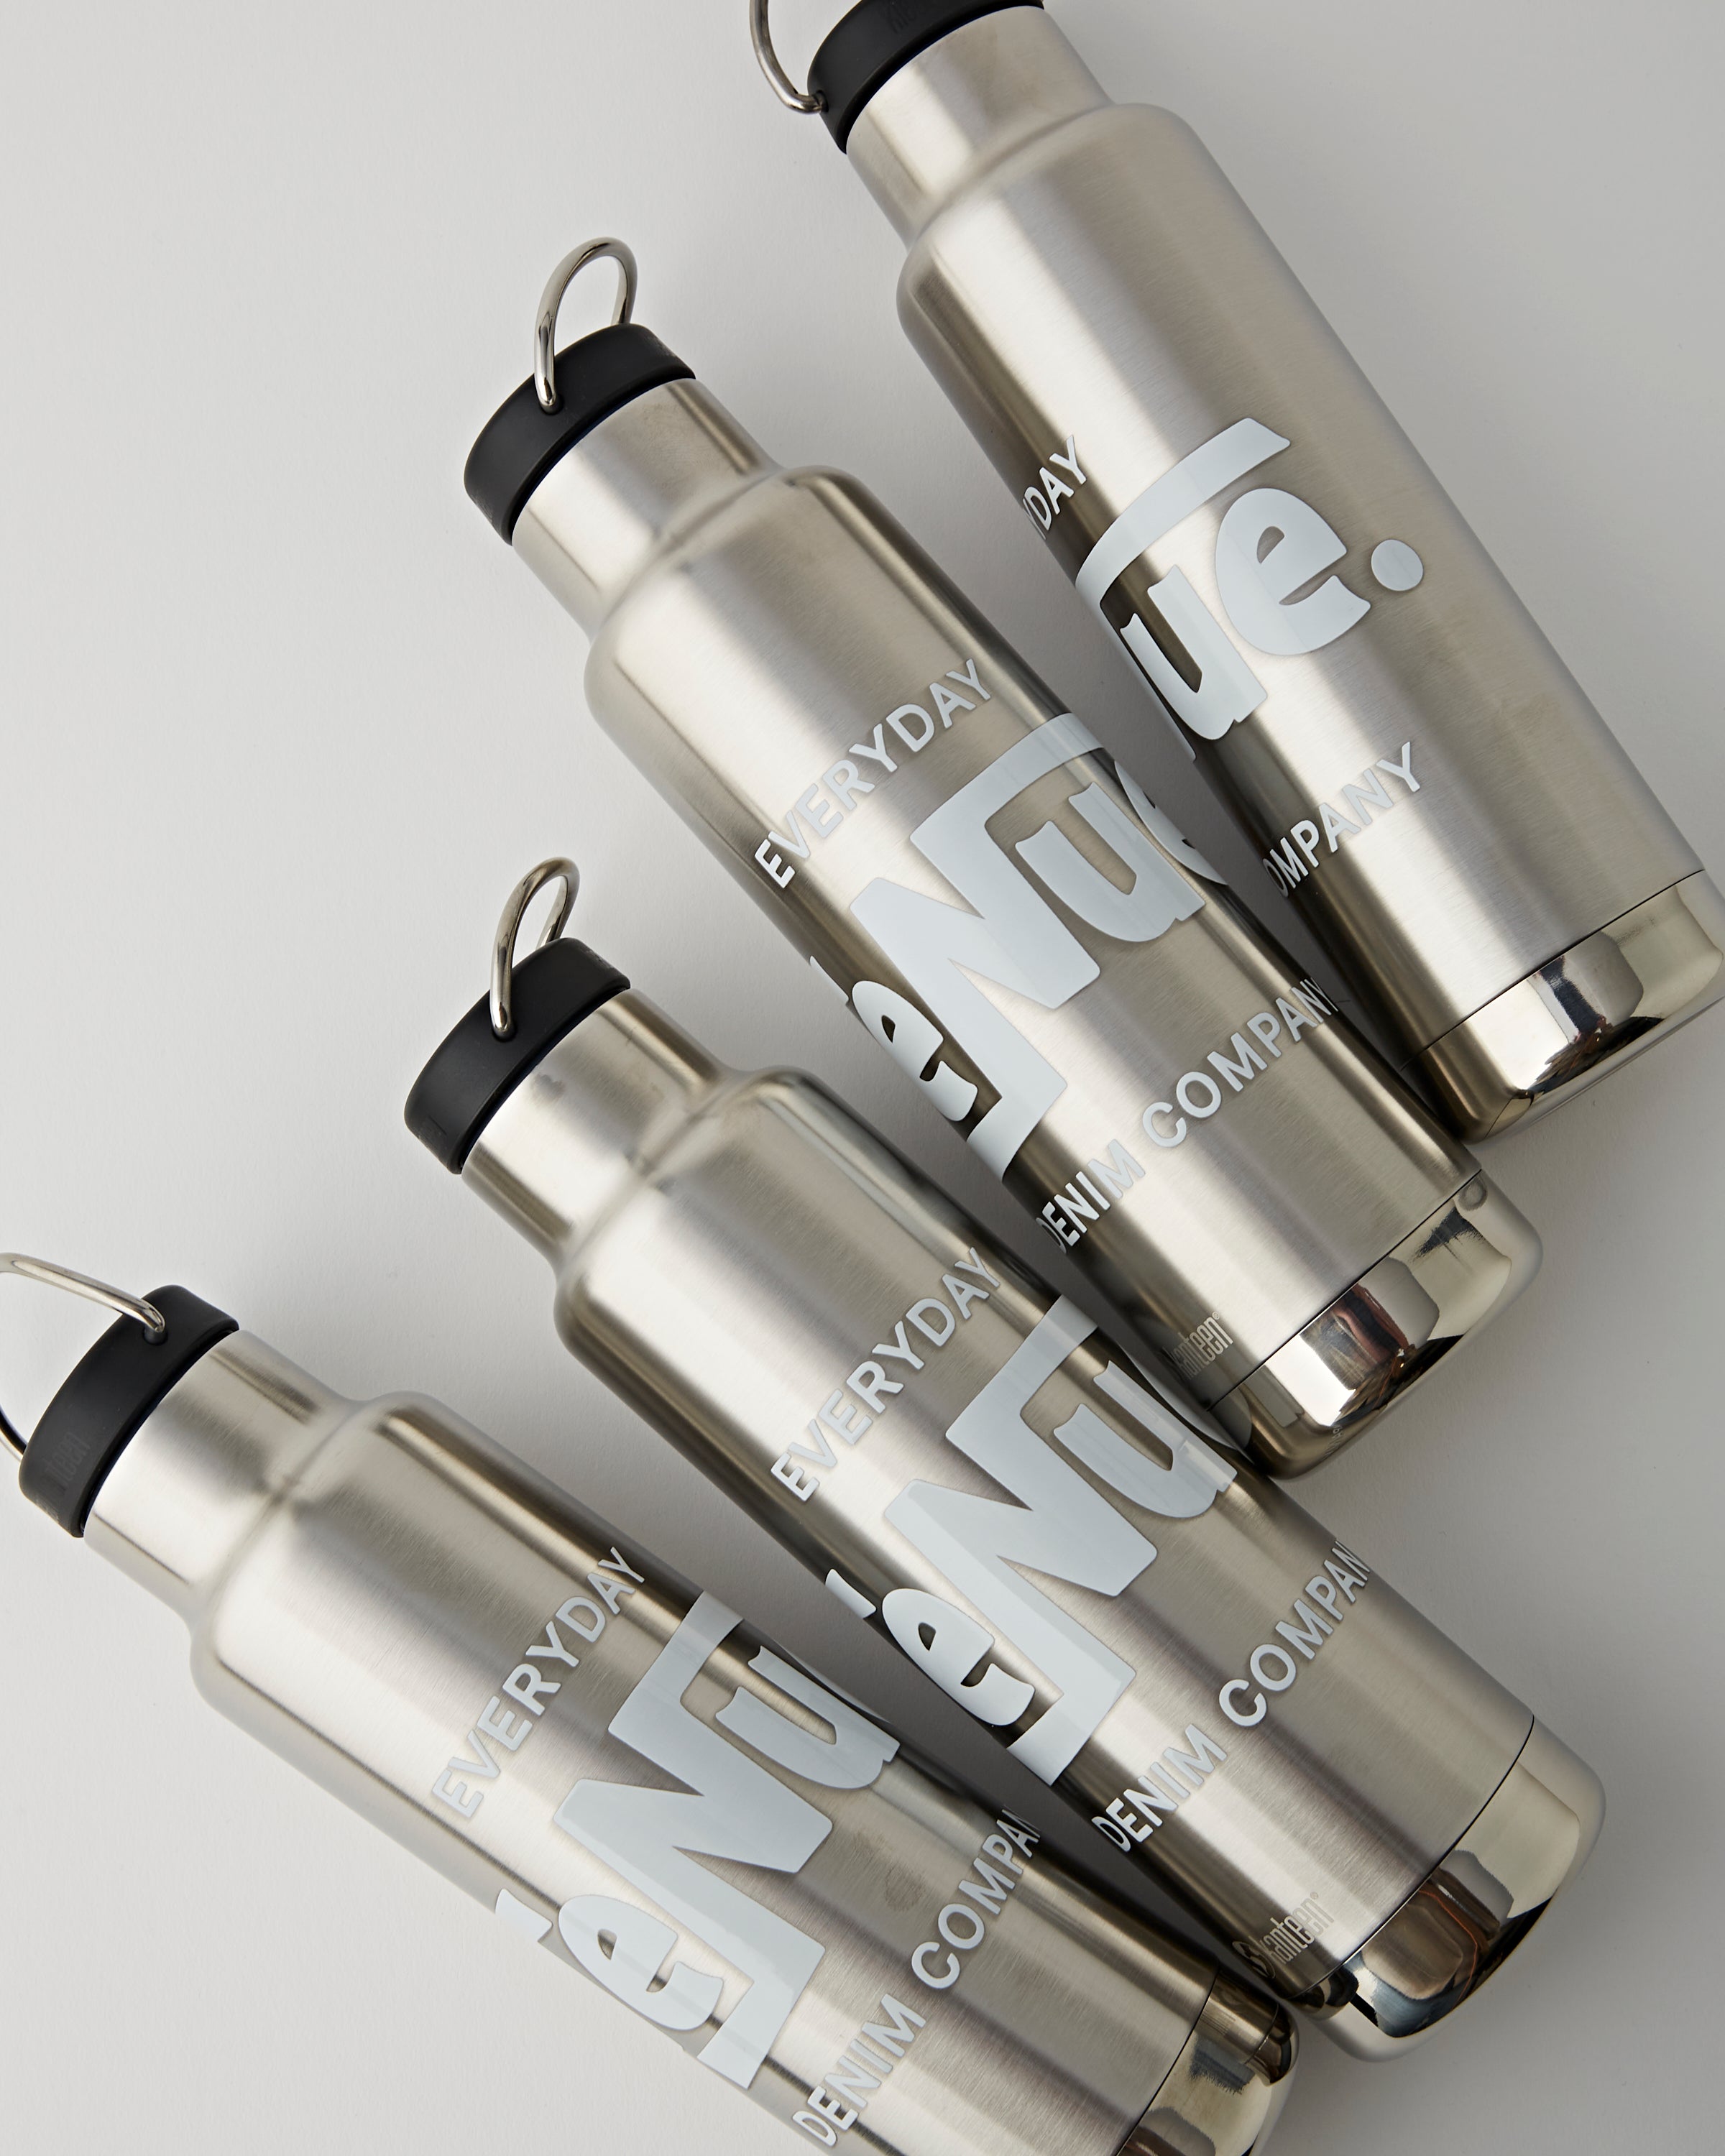 Tenue. x Klean Kanteen 20oz Classic Insulated Brushed Stainless